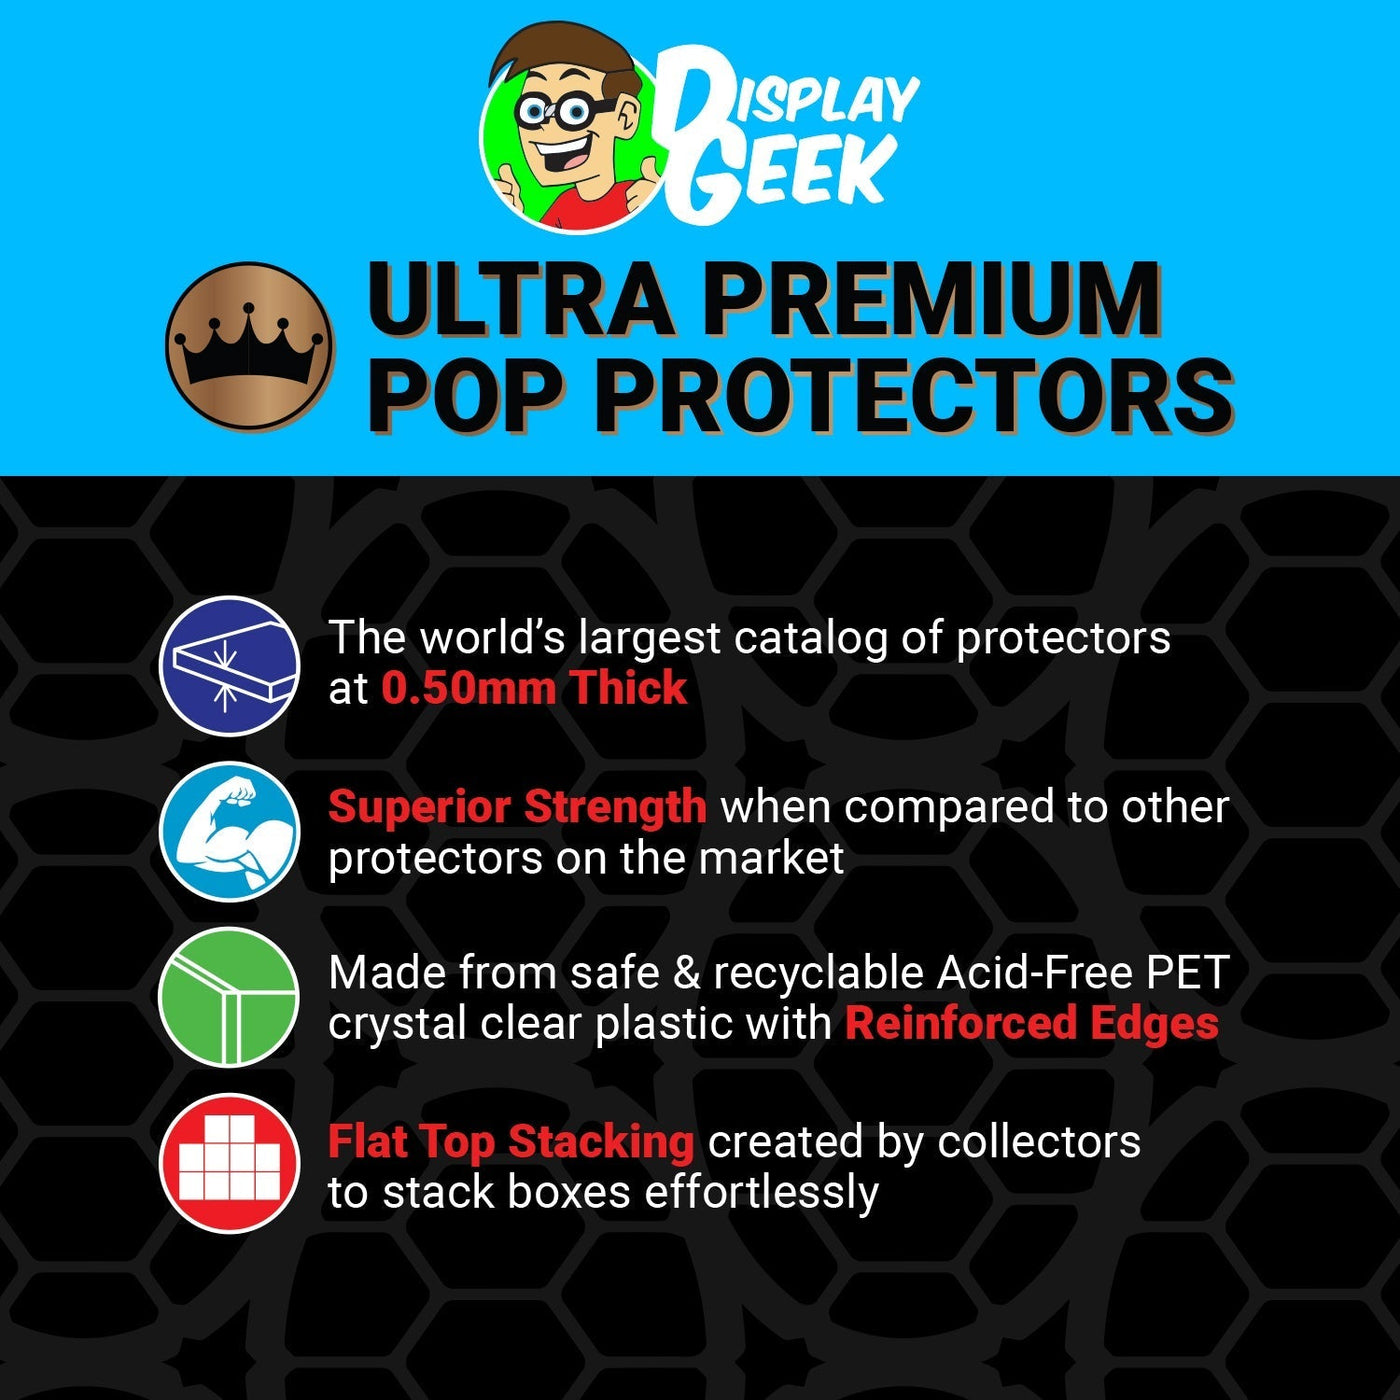 Pop Protector for FNAF Holiday Chica Funko Pop Pez on The Protector Guide App by Display Geek